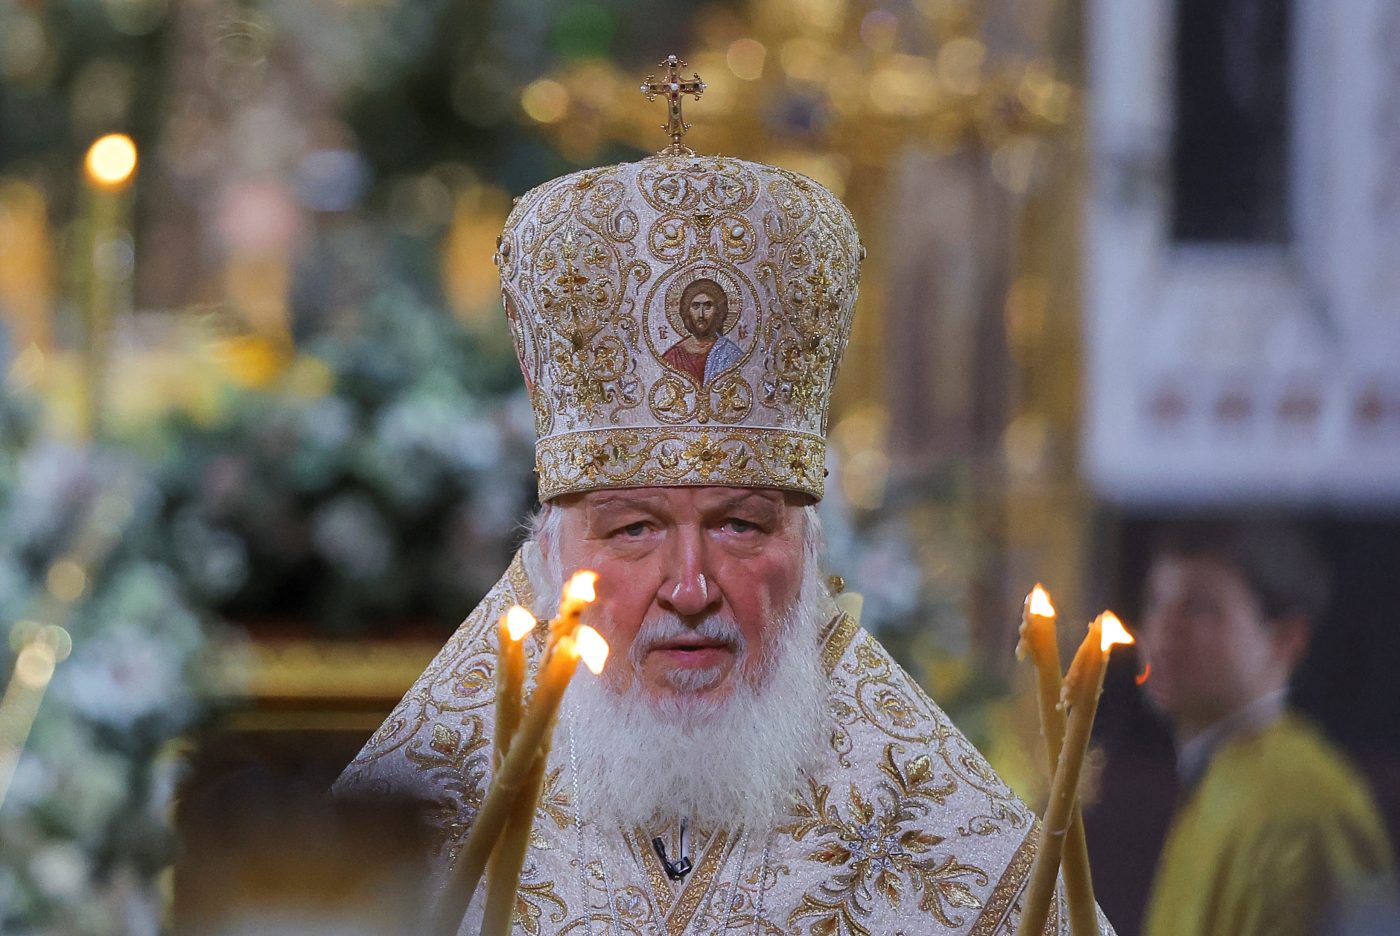 Photo: Patriarch Kirill of Moscow and All Russia conducts the Orthodox Christmas service at the Cathedral of Christ the Saviour in Moscow, Russia, January 6, 2023. Credit: REUTERS/Evgenia Novozhenina